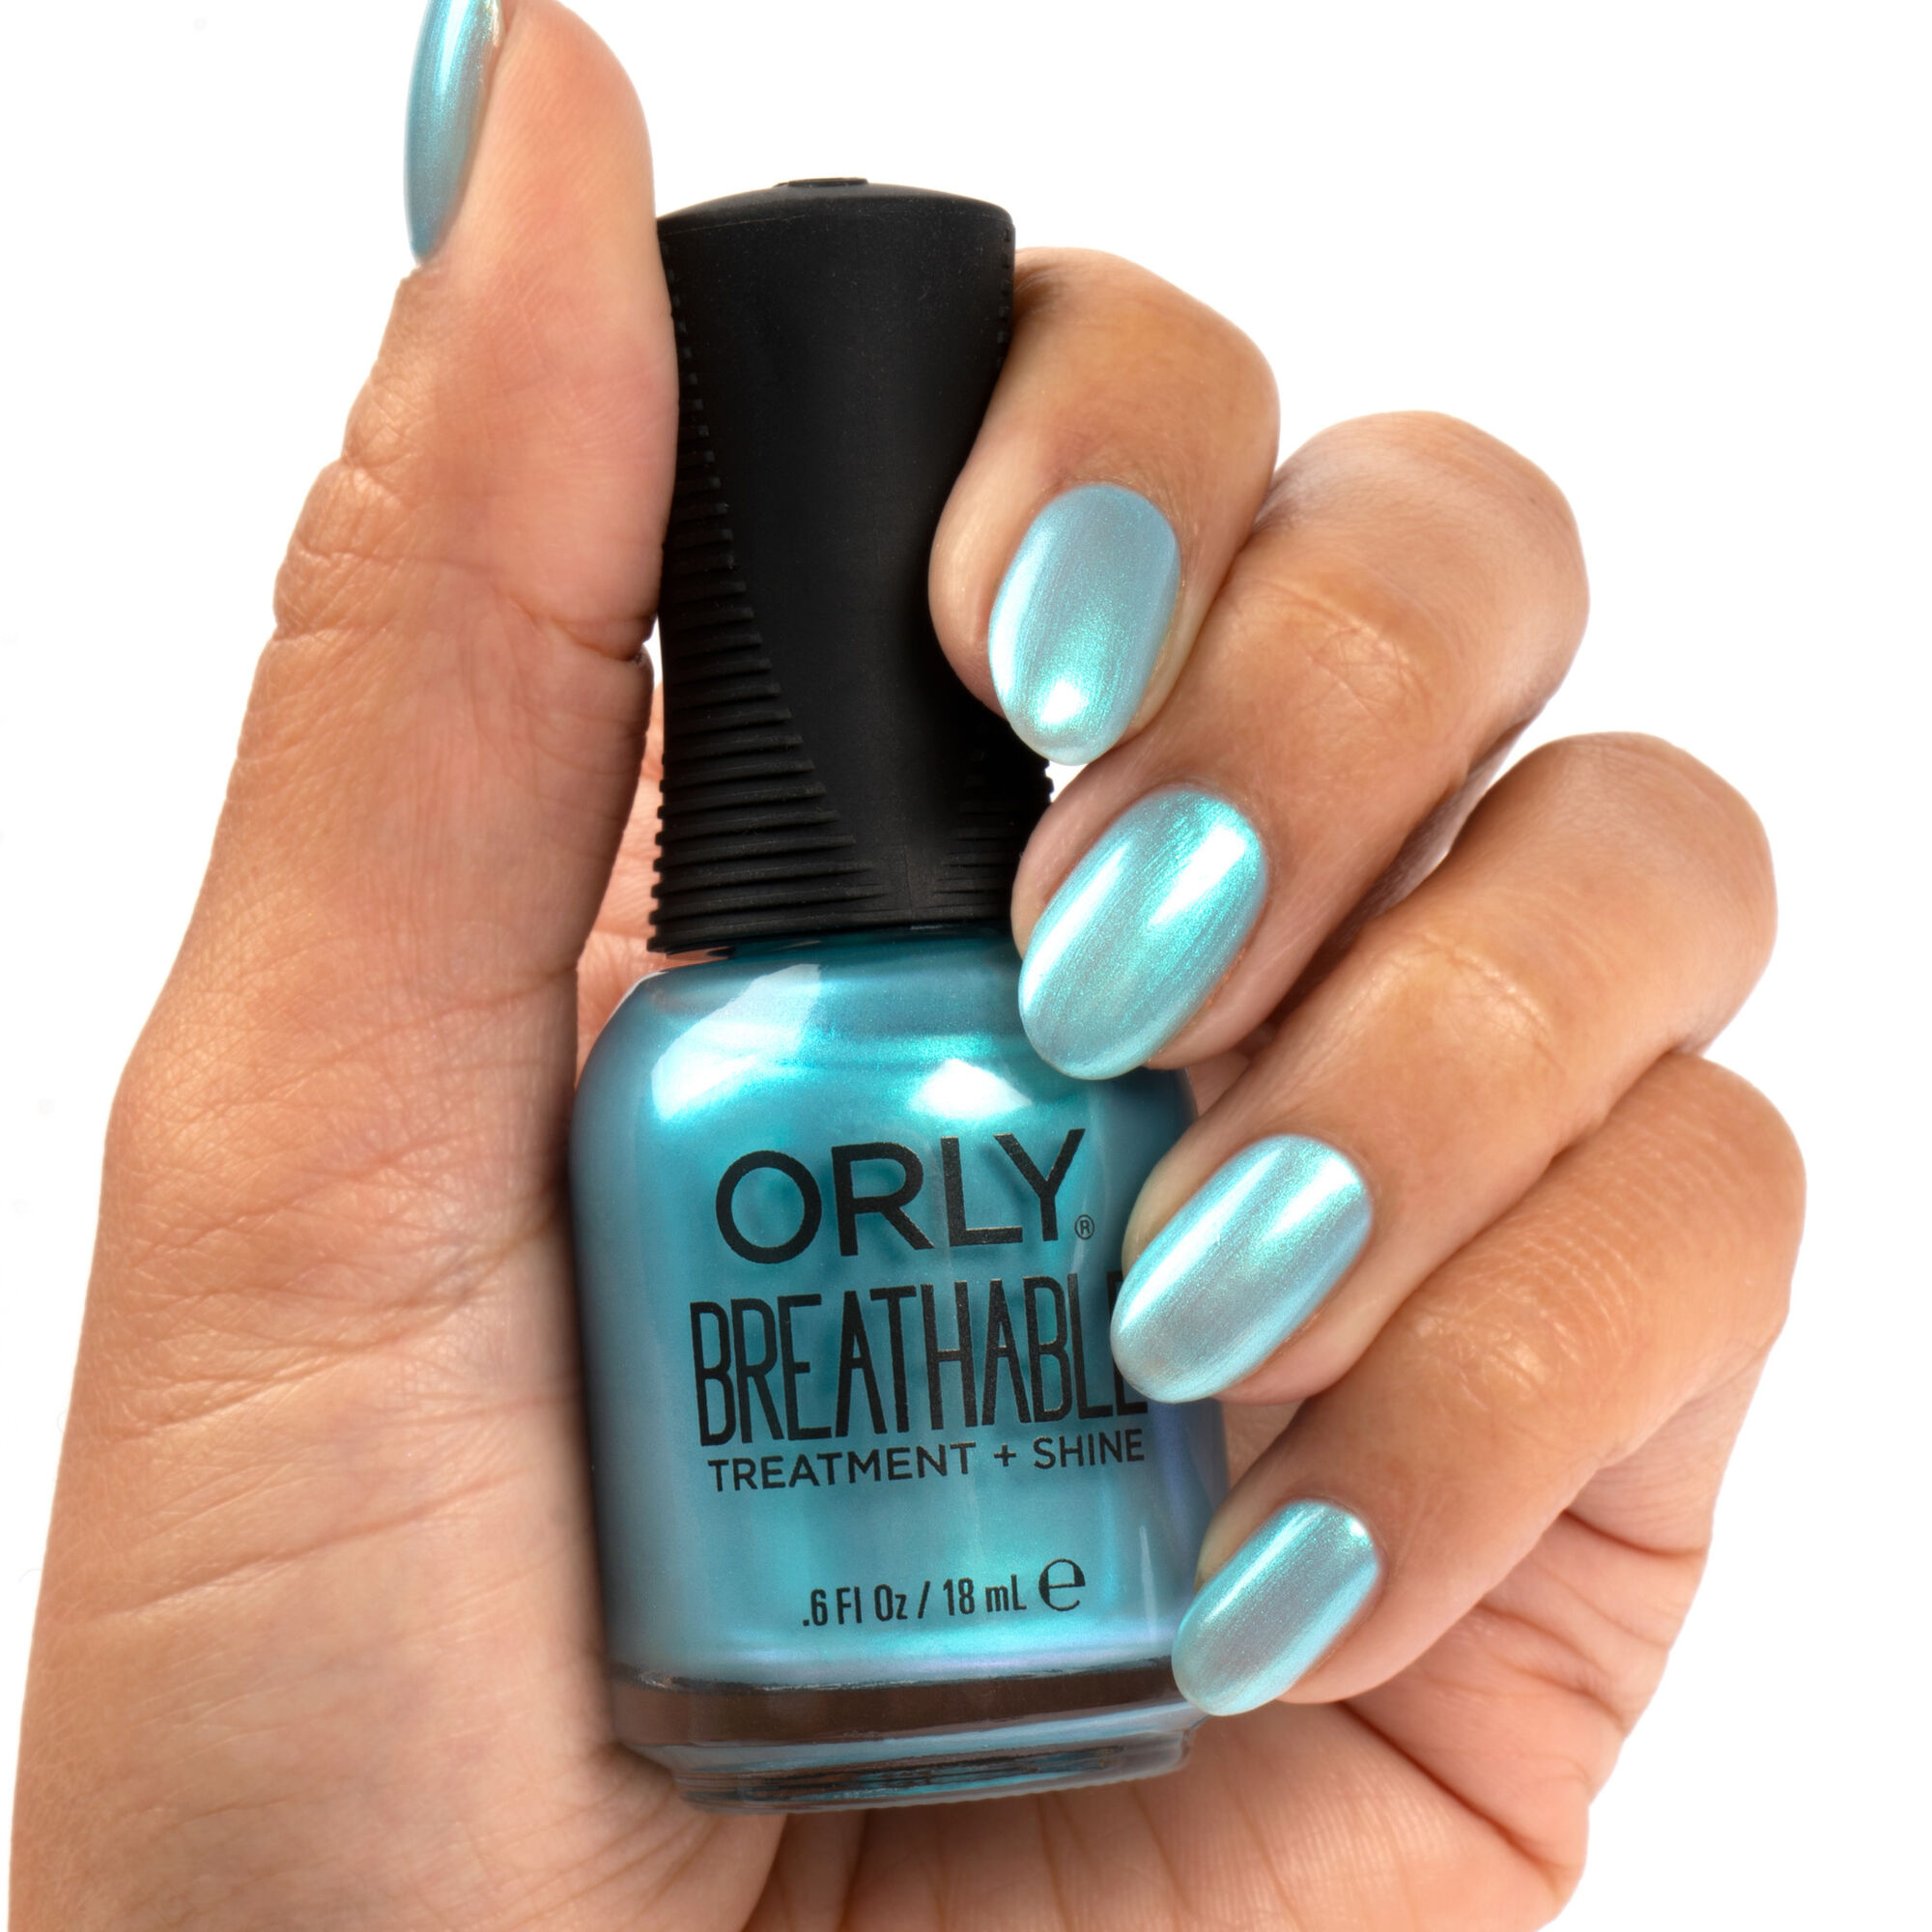 Orly Breathable surfs you right18 ml. Pedimed